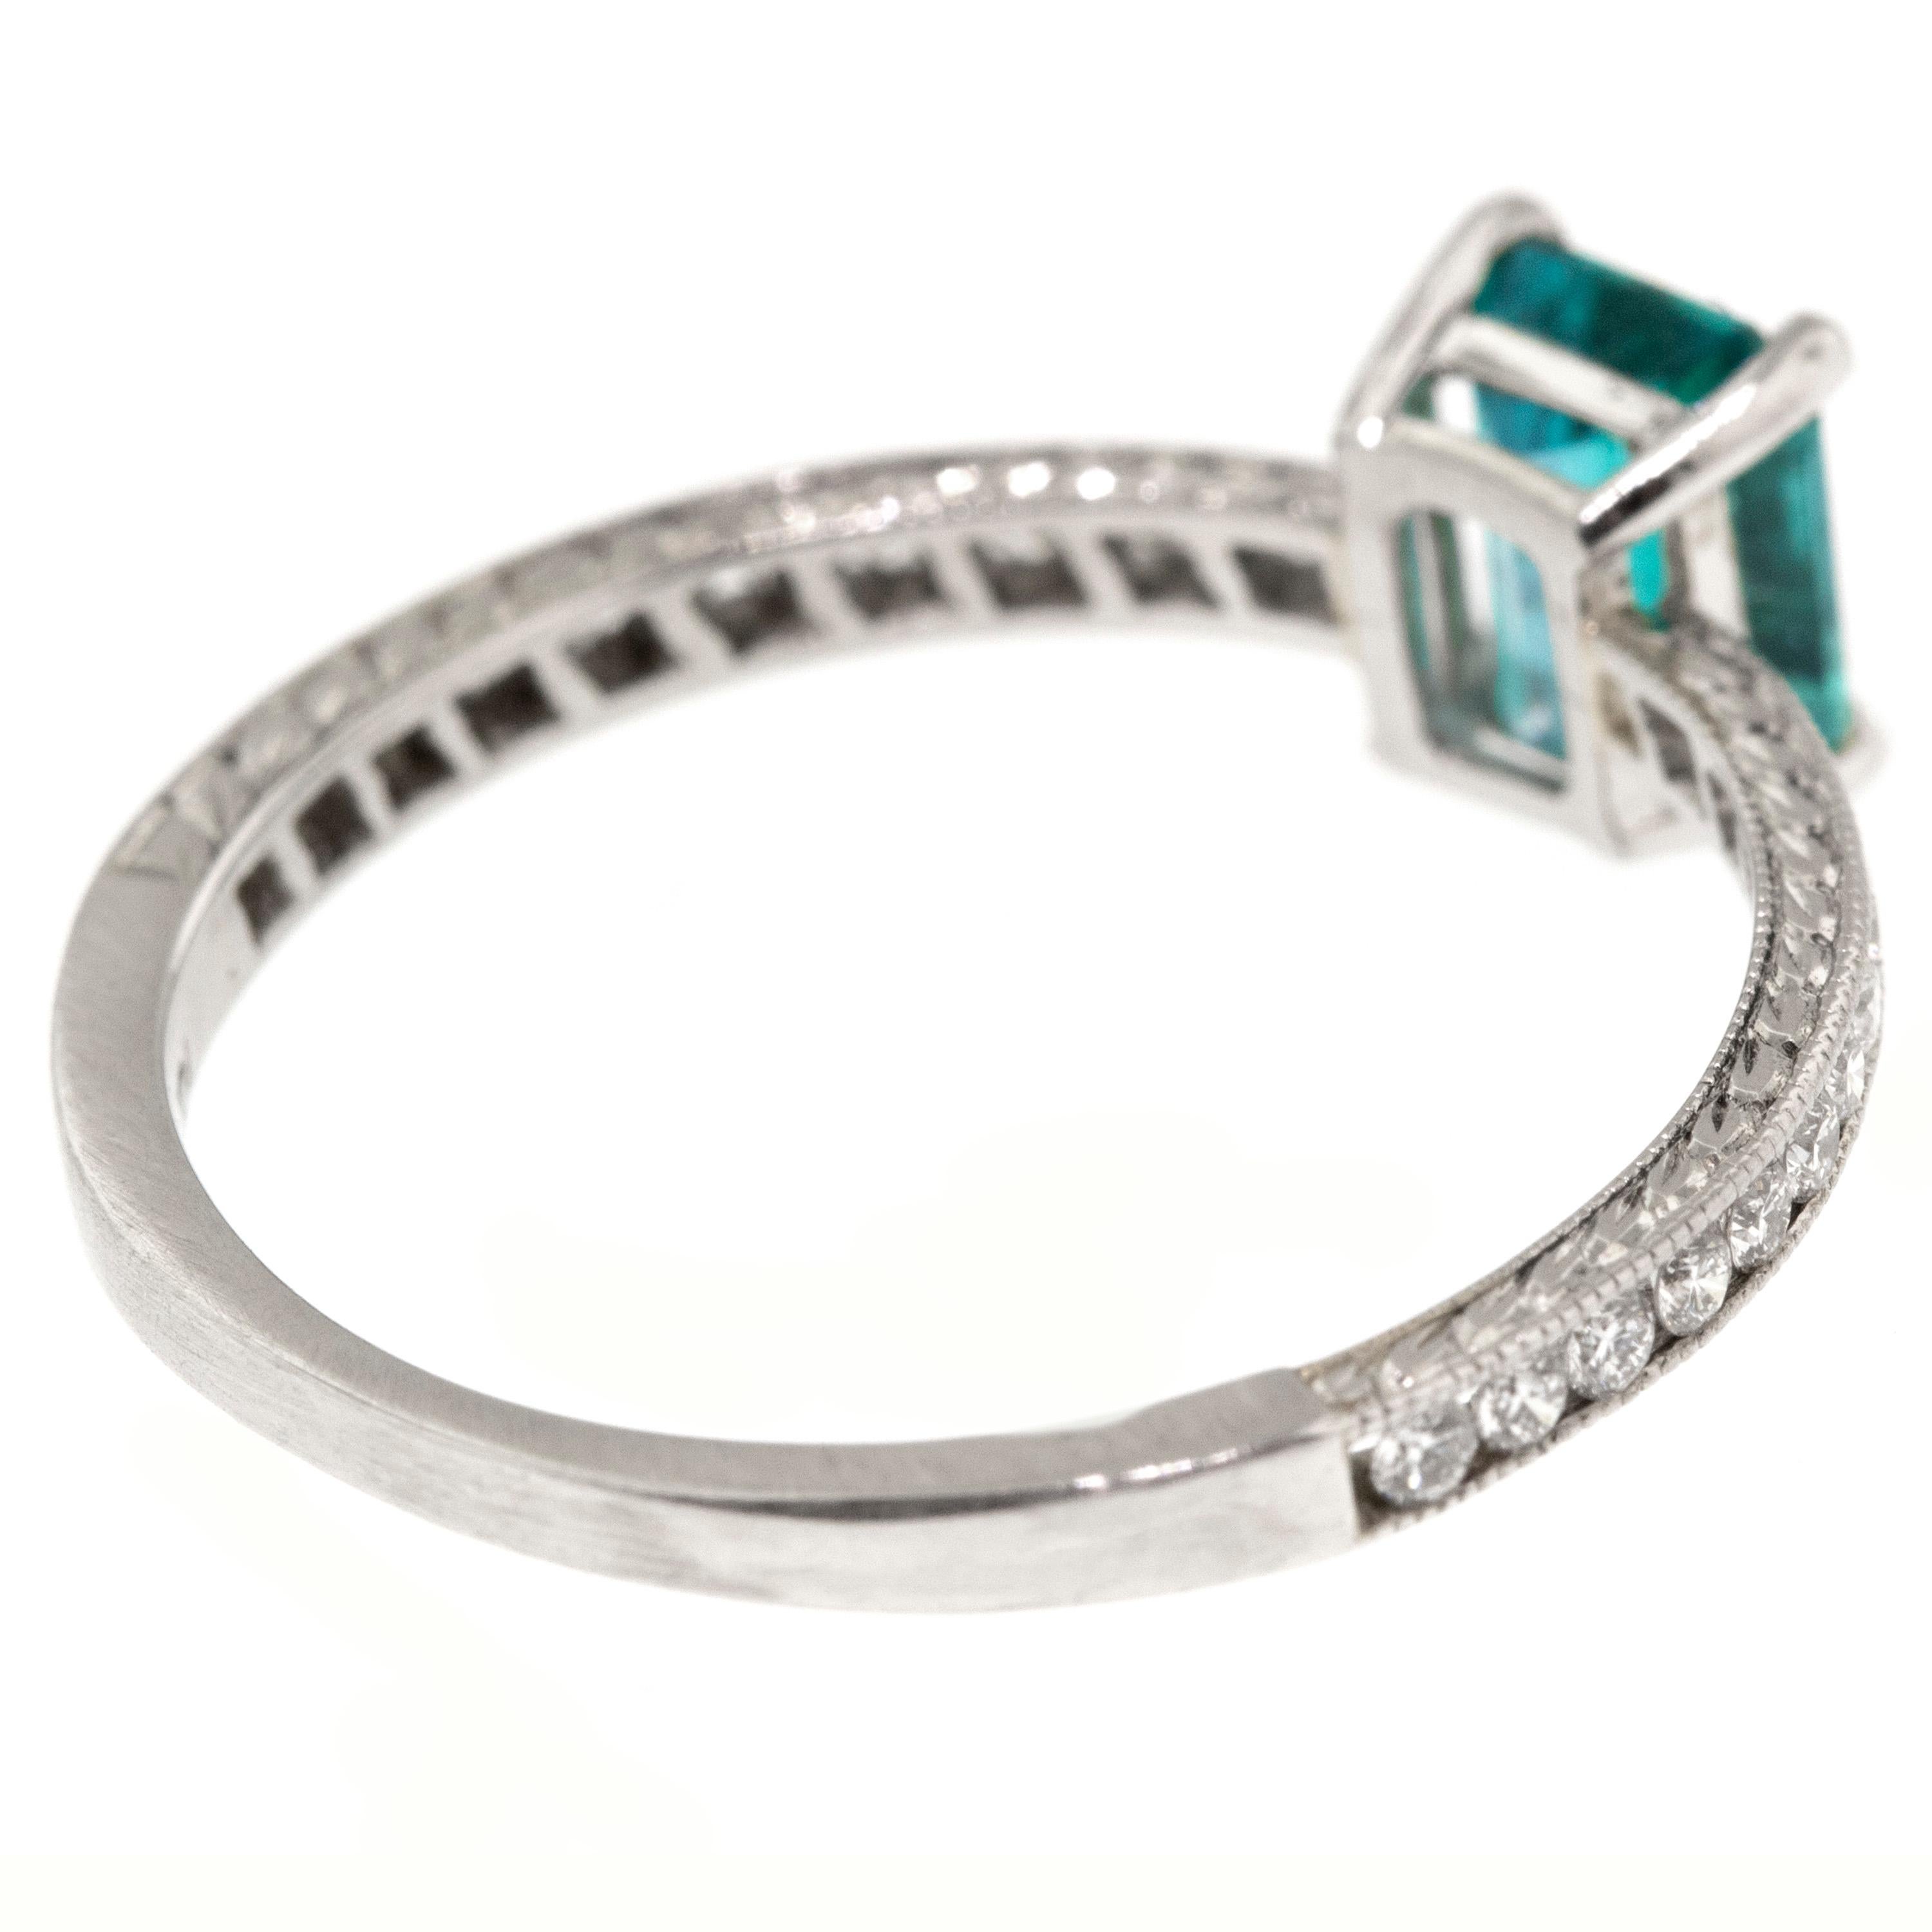 0.92ct Brazilian Paraiba Tourmaline (GIA Certified) in Diamond and Platinum Ring In New Condition For Sale In Logan, UT